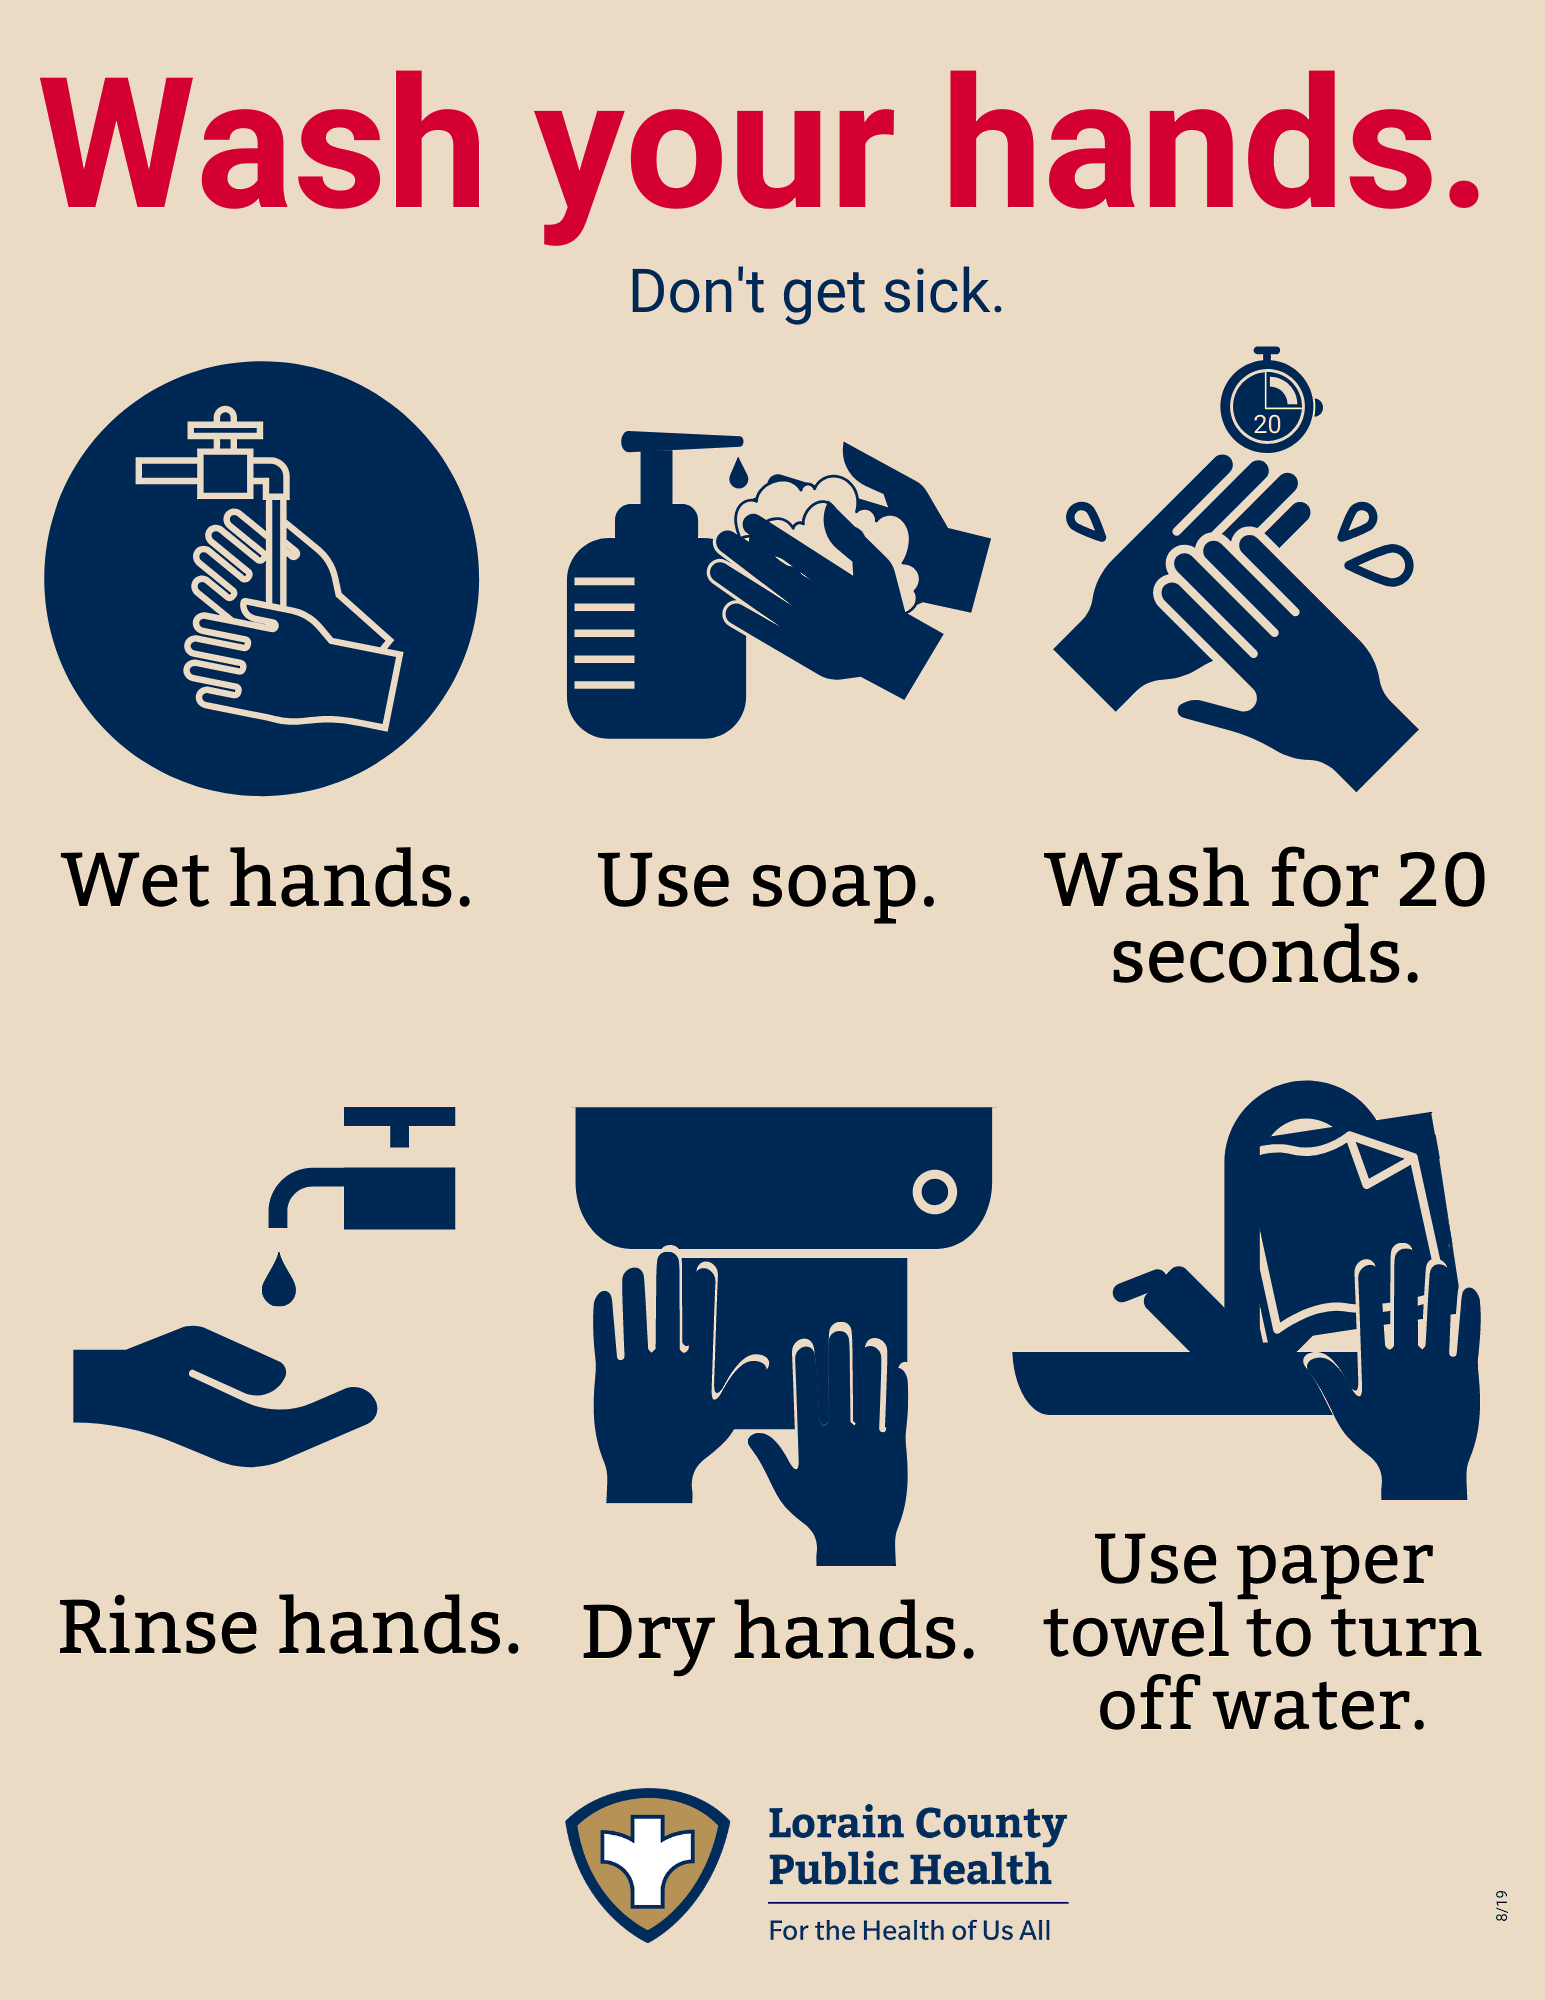 Wash your hands. Don't get sick. Wet hands. Use soap. Wash for 20 seconds. Rinse hands. Dry hands. Use paper towel to turn off water."